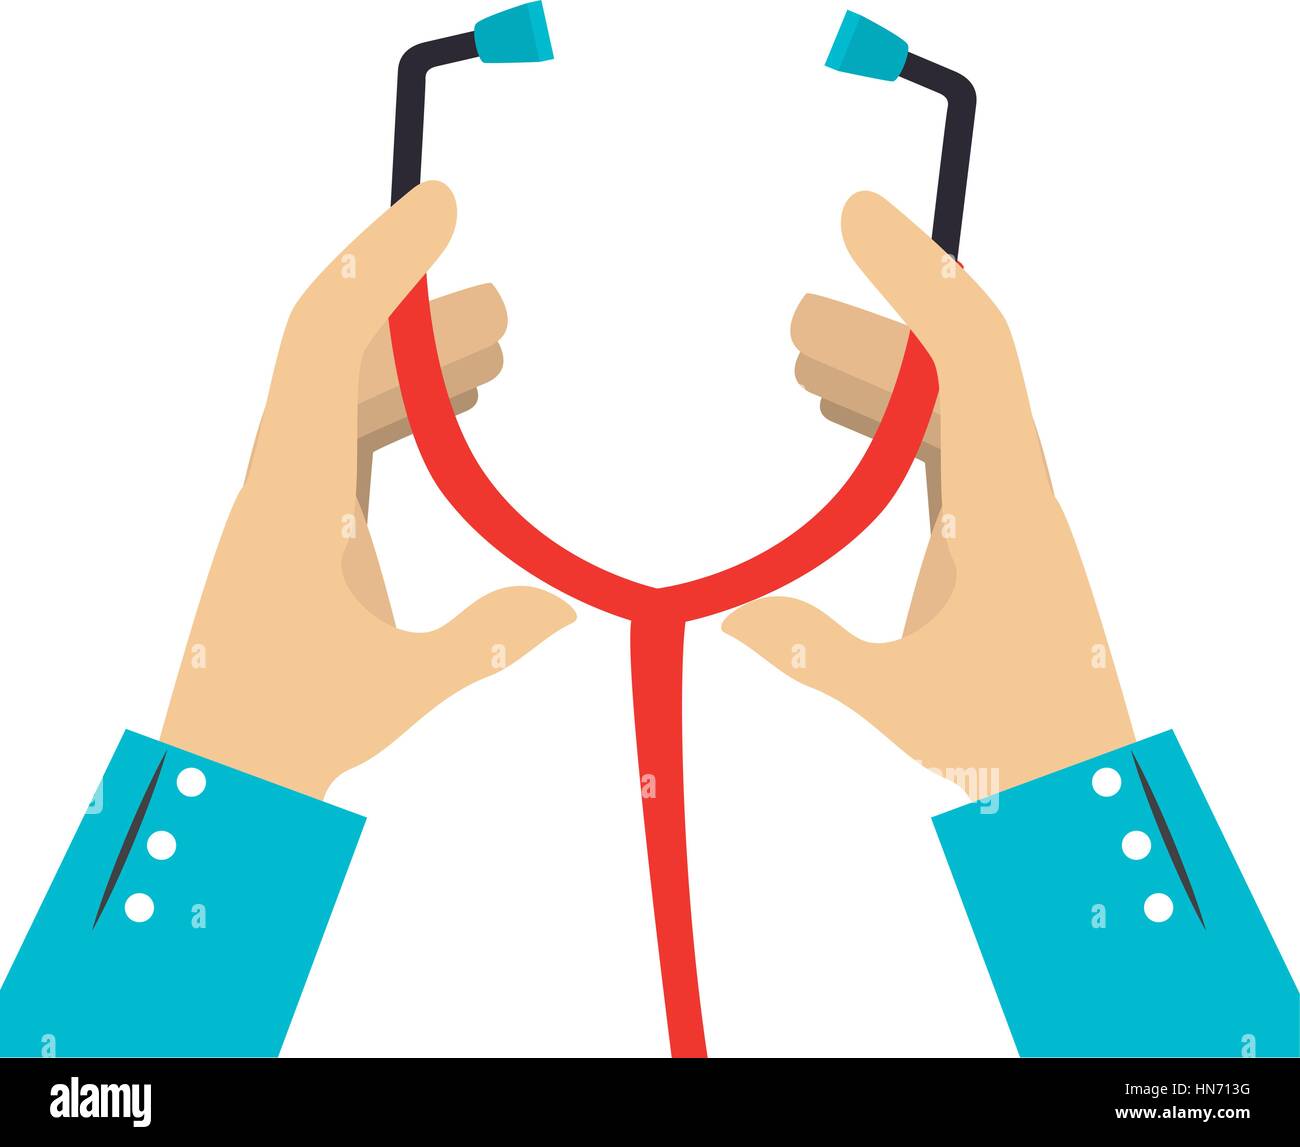 colorful silhouette of hands with stethoscope vector illustration Stock Vector